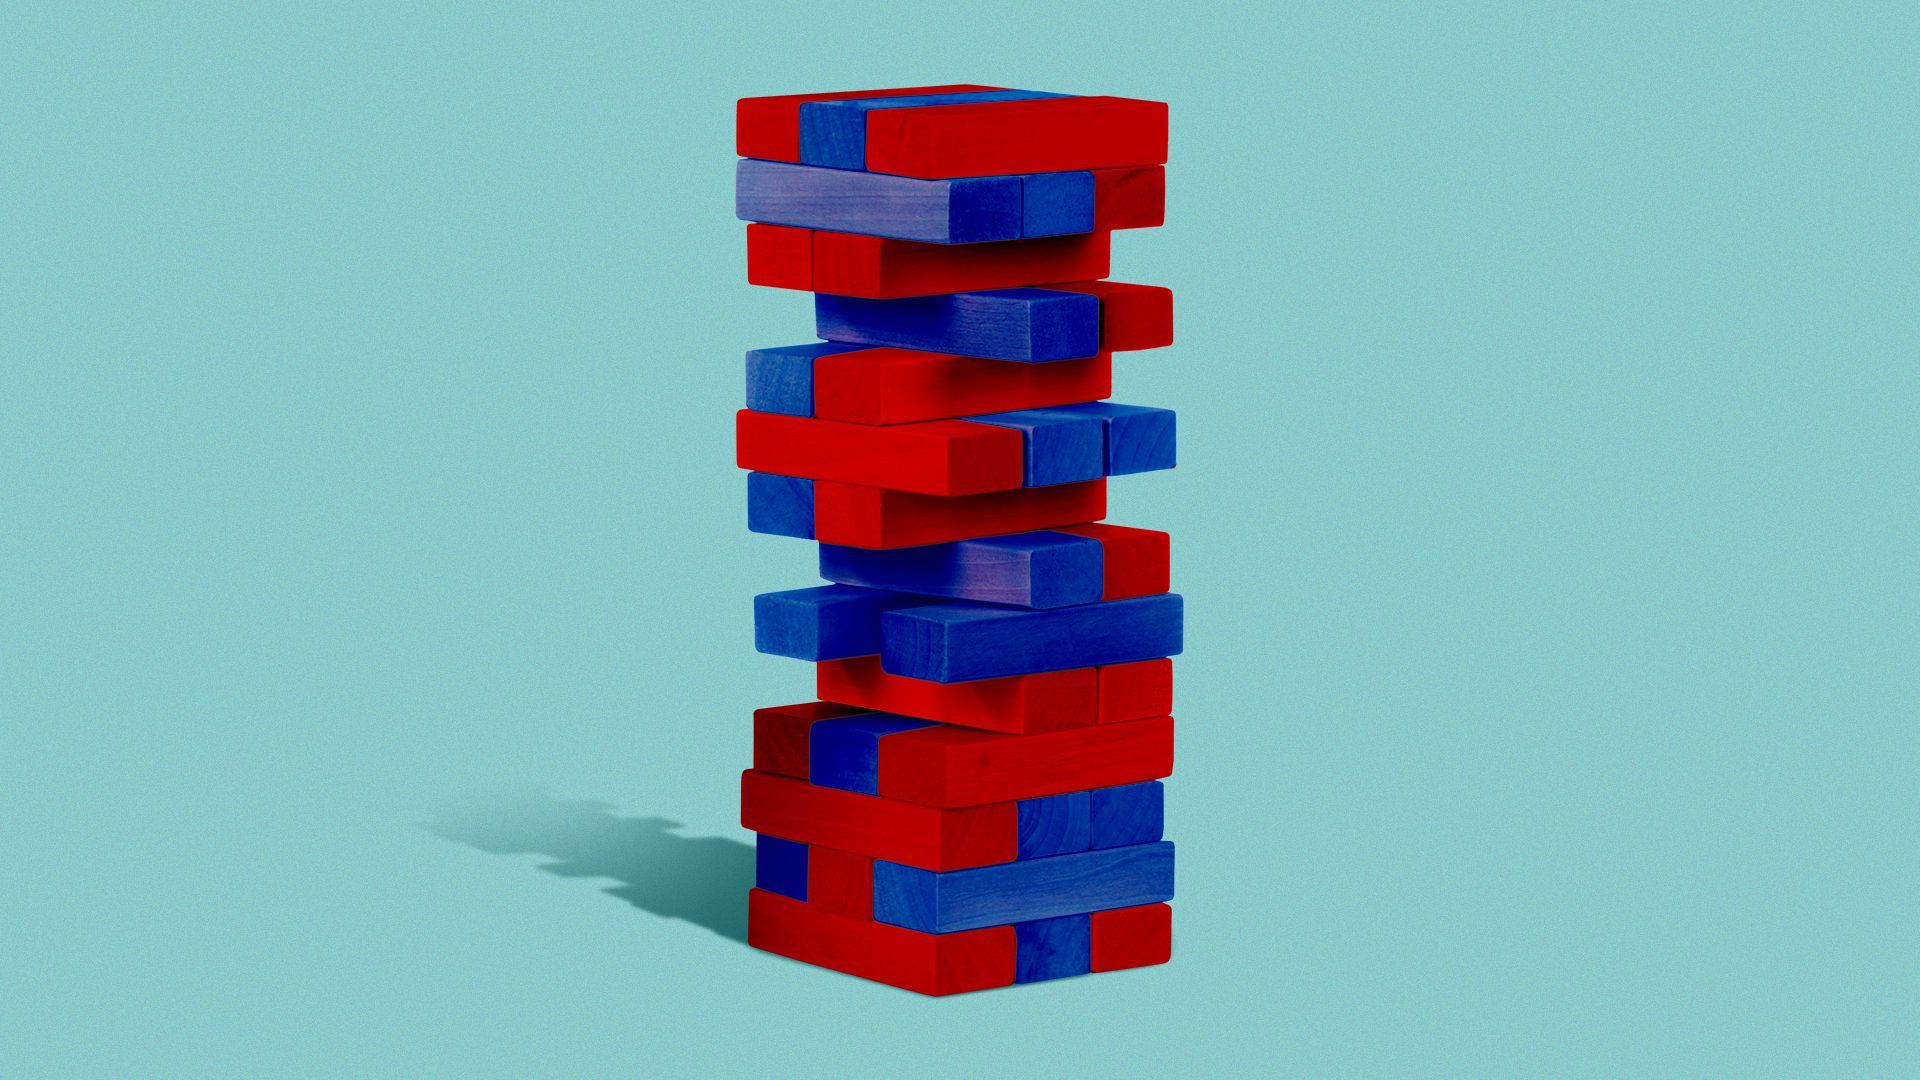 Illustration of a a tower of red and blue building blocks forming a tower and many of the blocks are missing